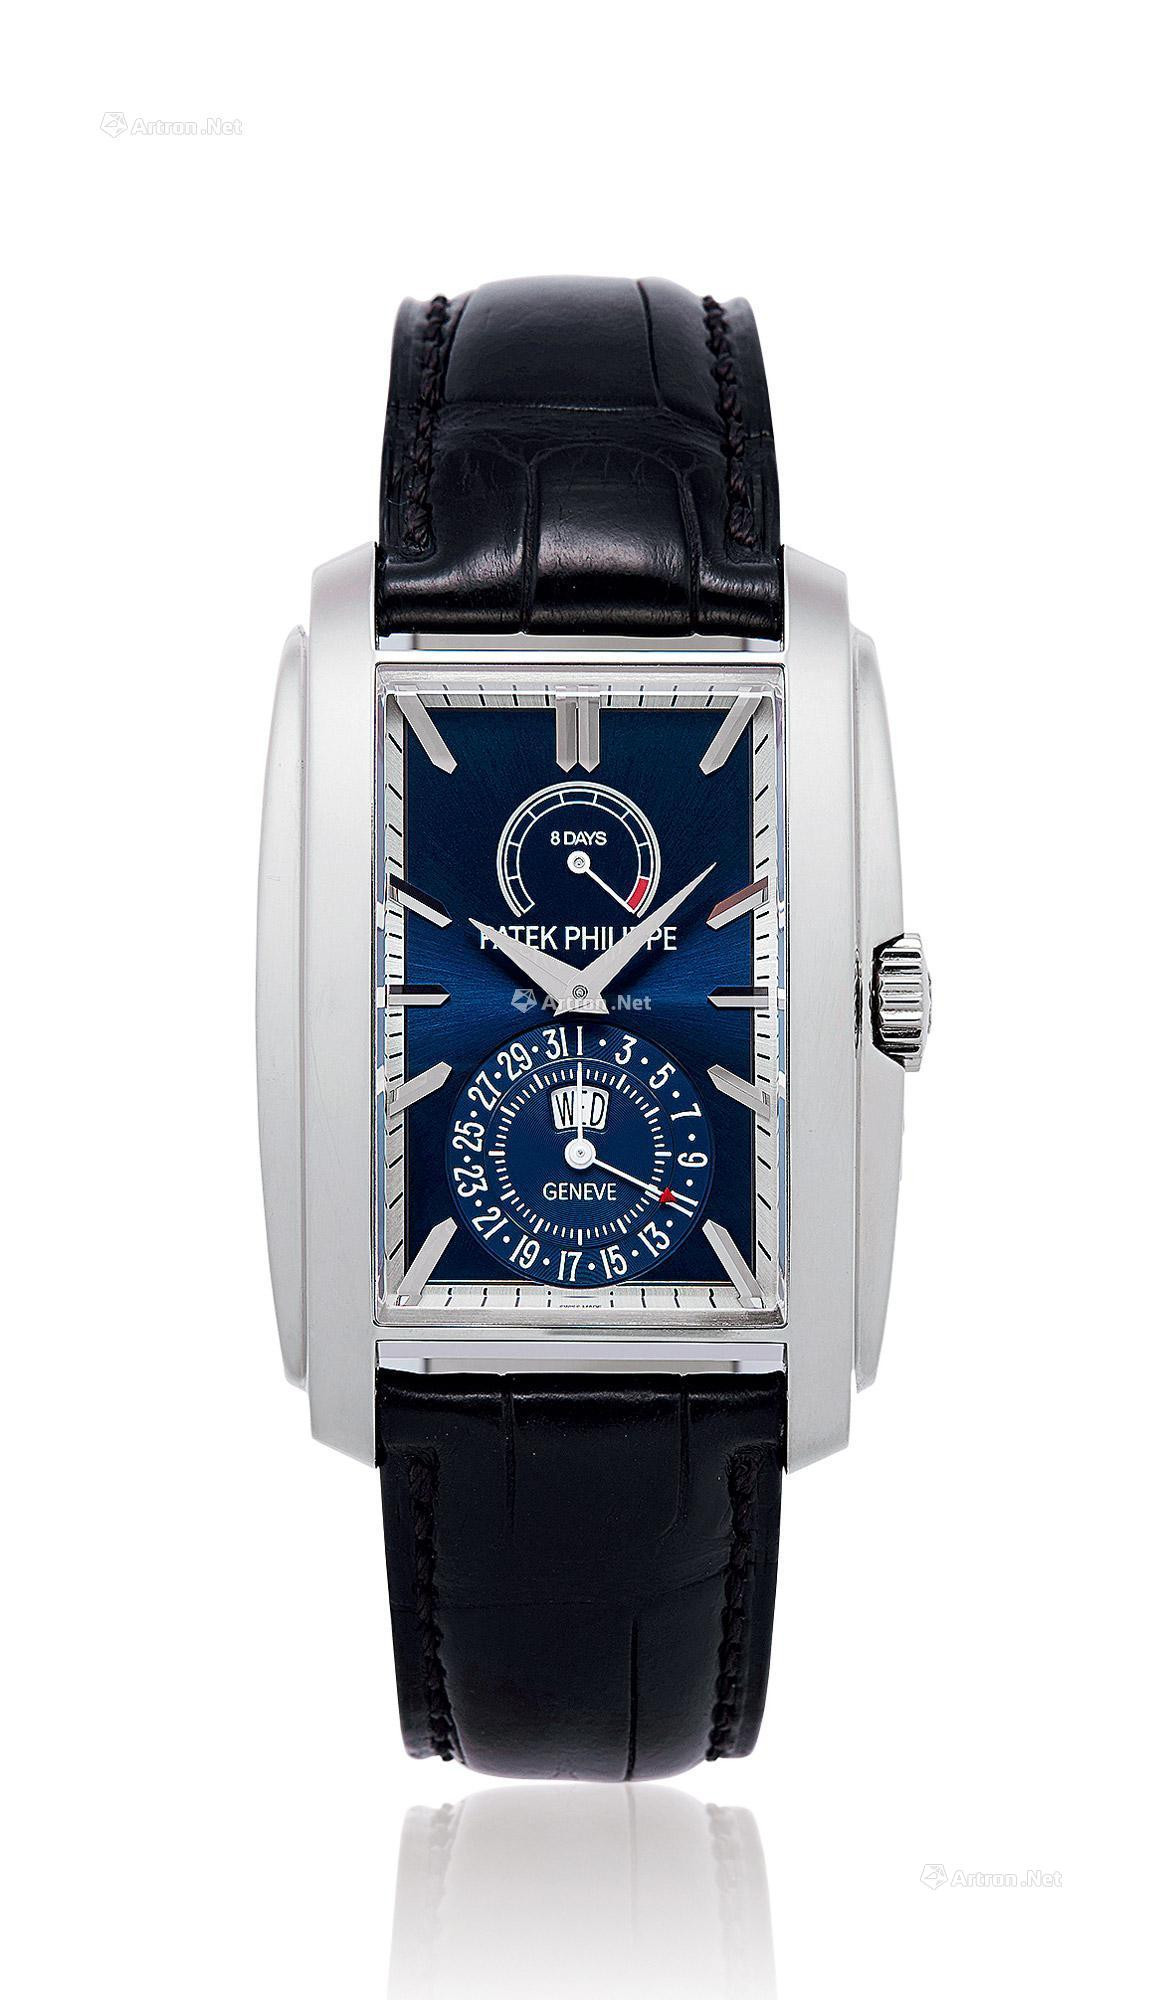 PATEK PHILIPPE A WHITE GOLD MANUALLY-WOUND WRISTWATCH WITH 8 DAYS POWER-RESERVE， WEEK AND DATE INDICATION